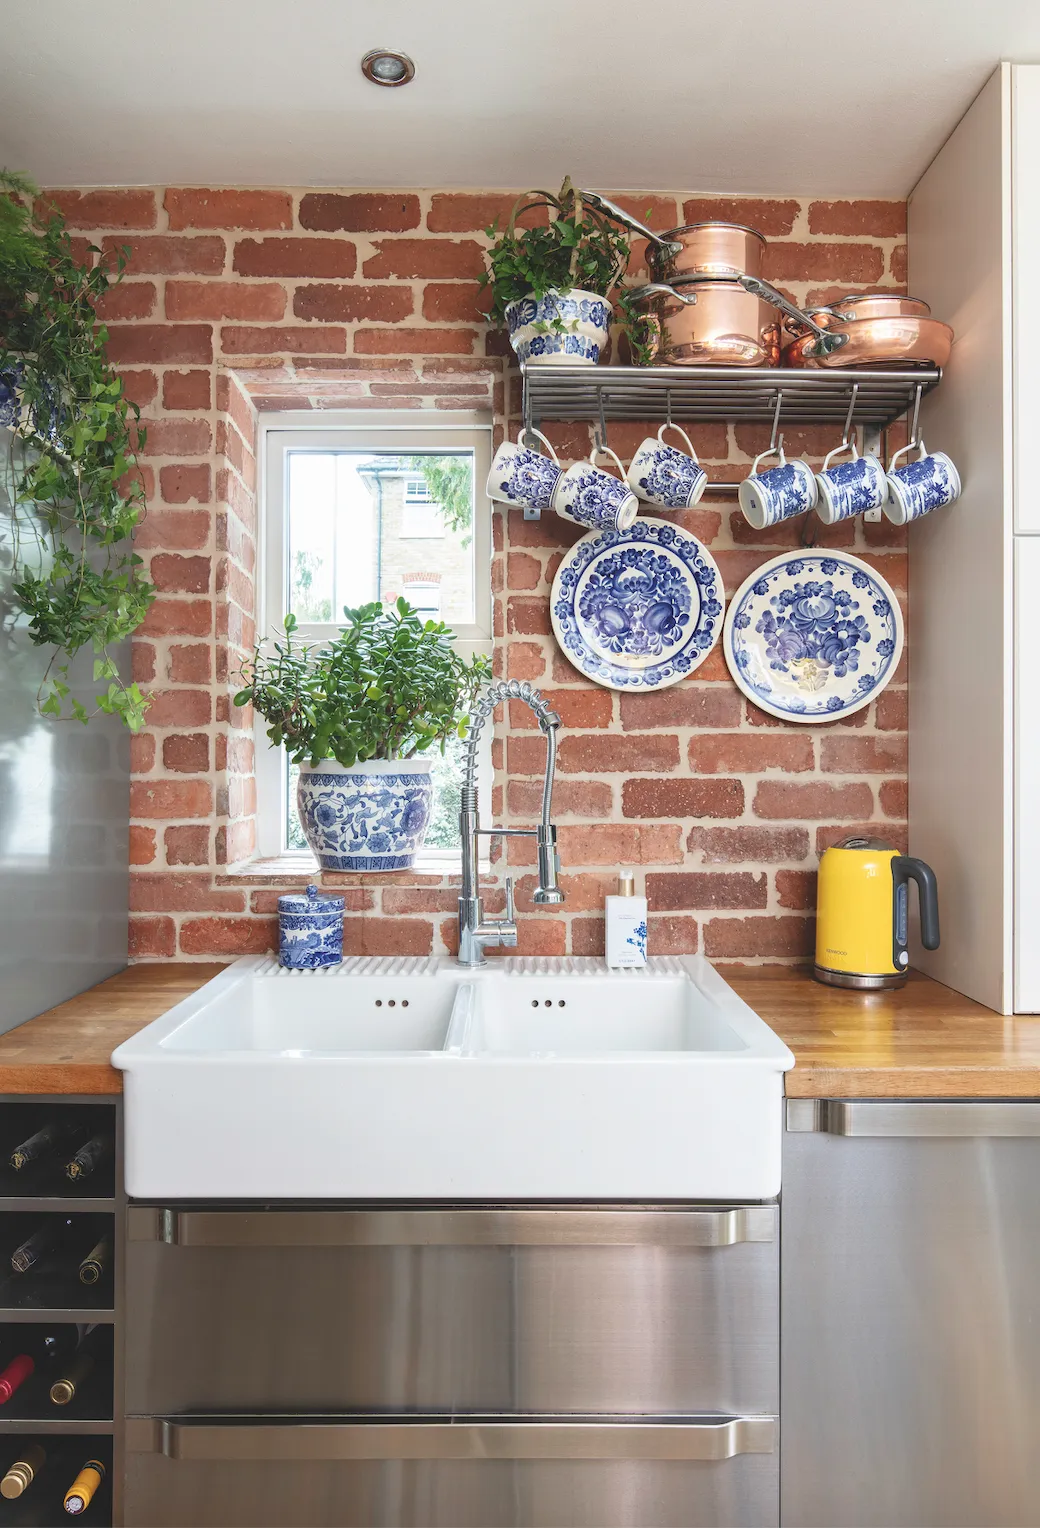 With its bare-brick wall, blue-and-white plates and mugs, sleek stainless-steel units and copper accessories, Anna has gone for a mix of rustic industrial and classic vintage styles in the kitchen